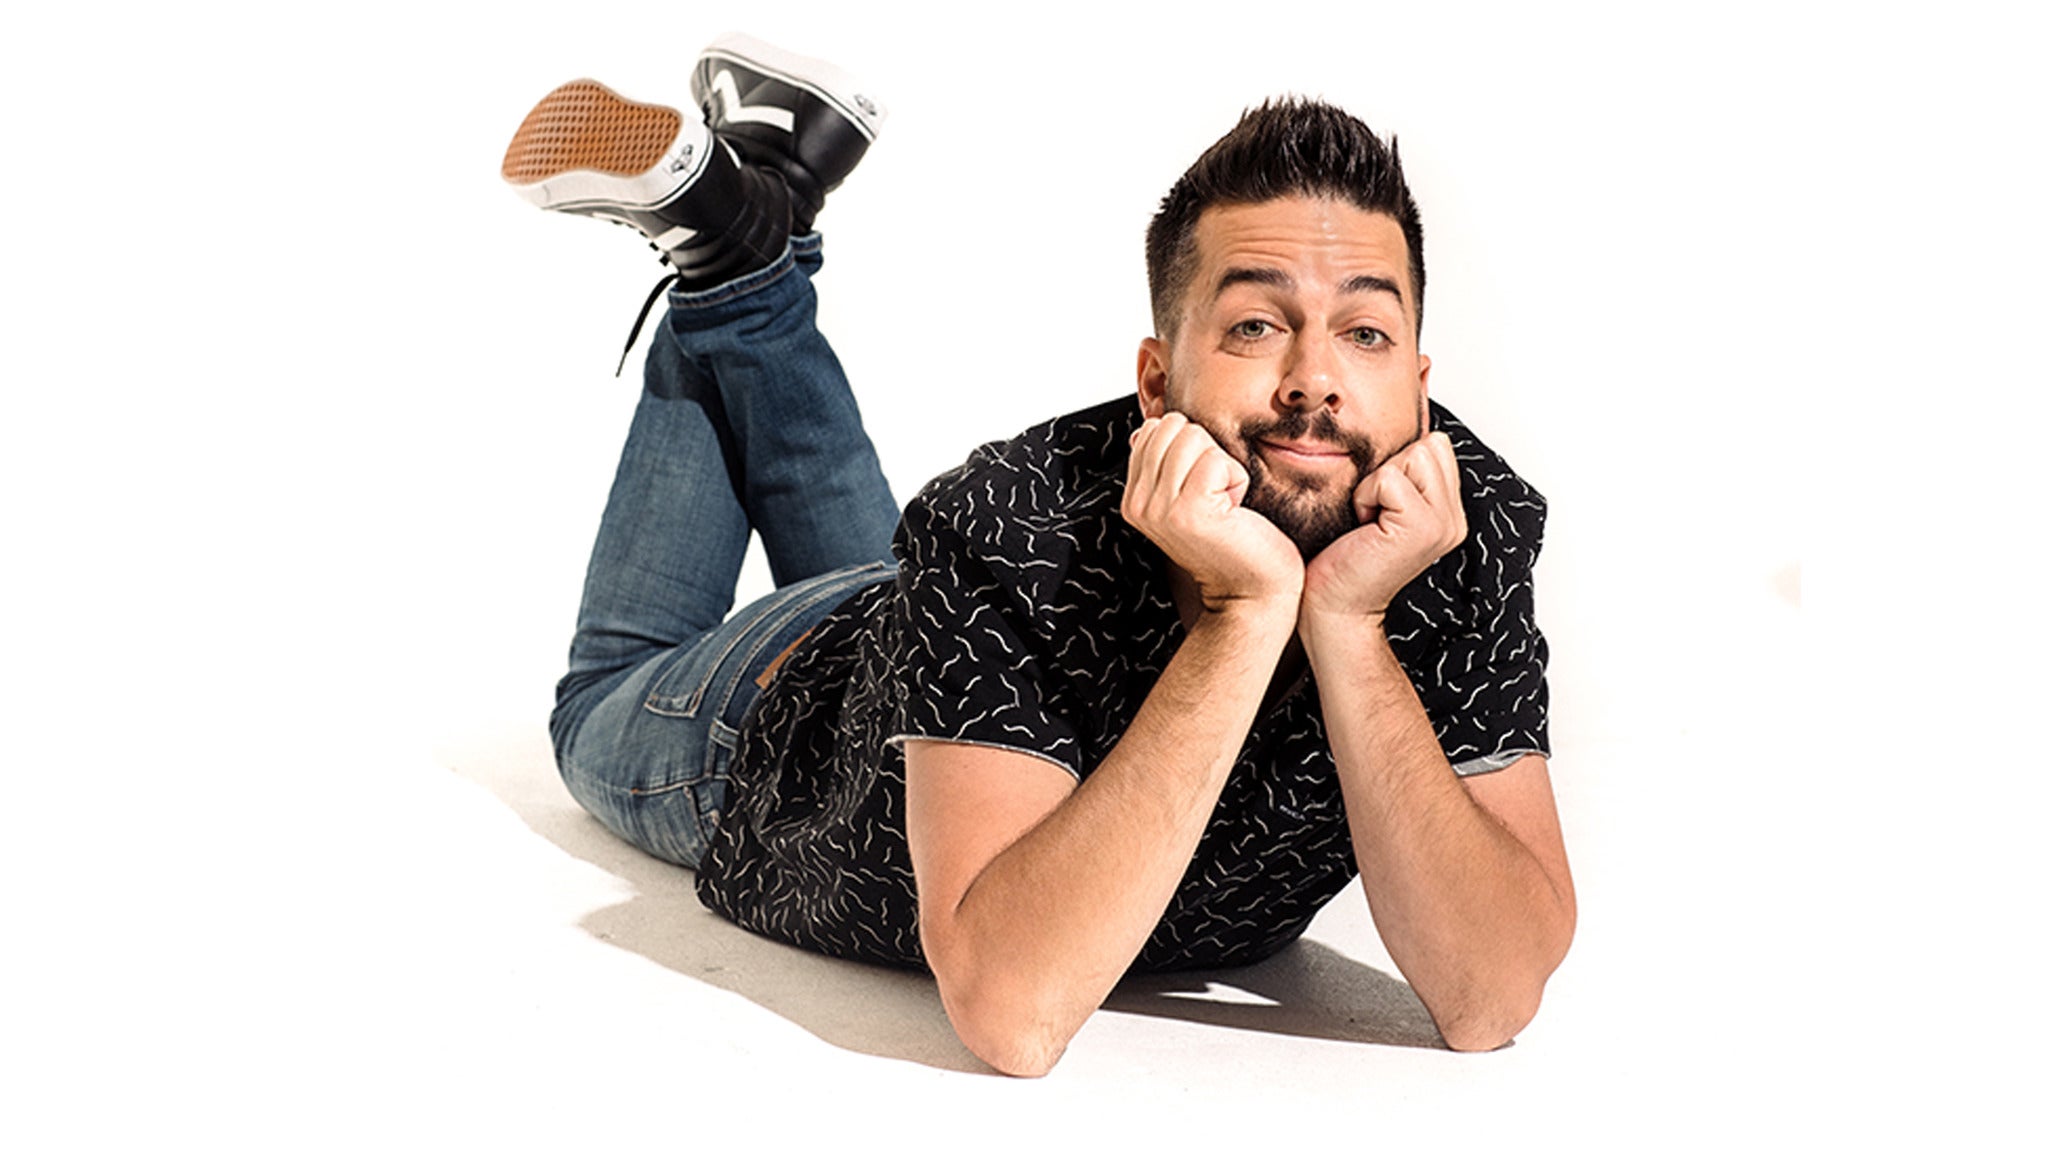 John Crist: Fresh Cuts Comedy Tour in Baton Rouge promo photo for Official Platinum presale offer code